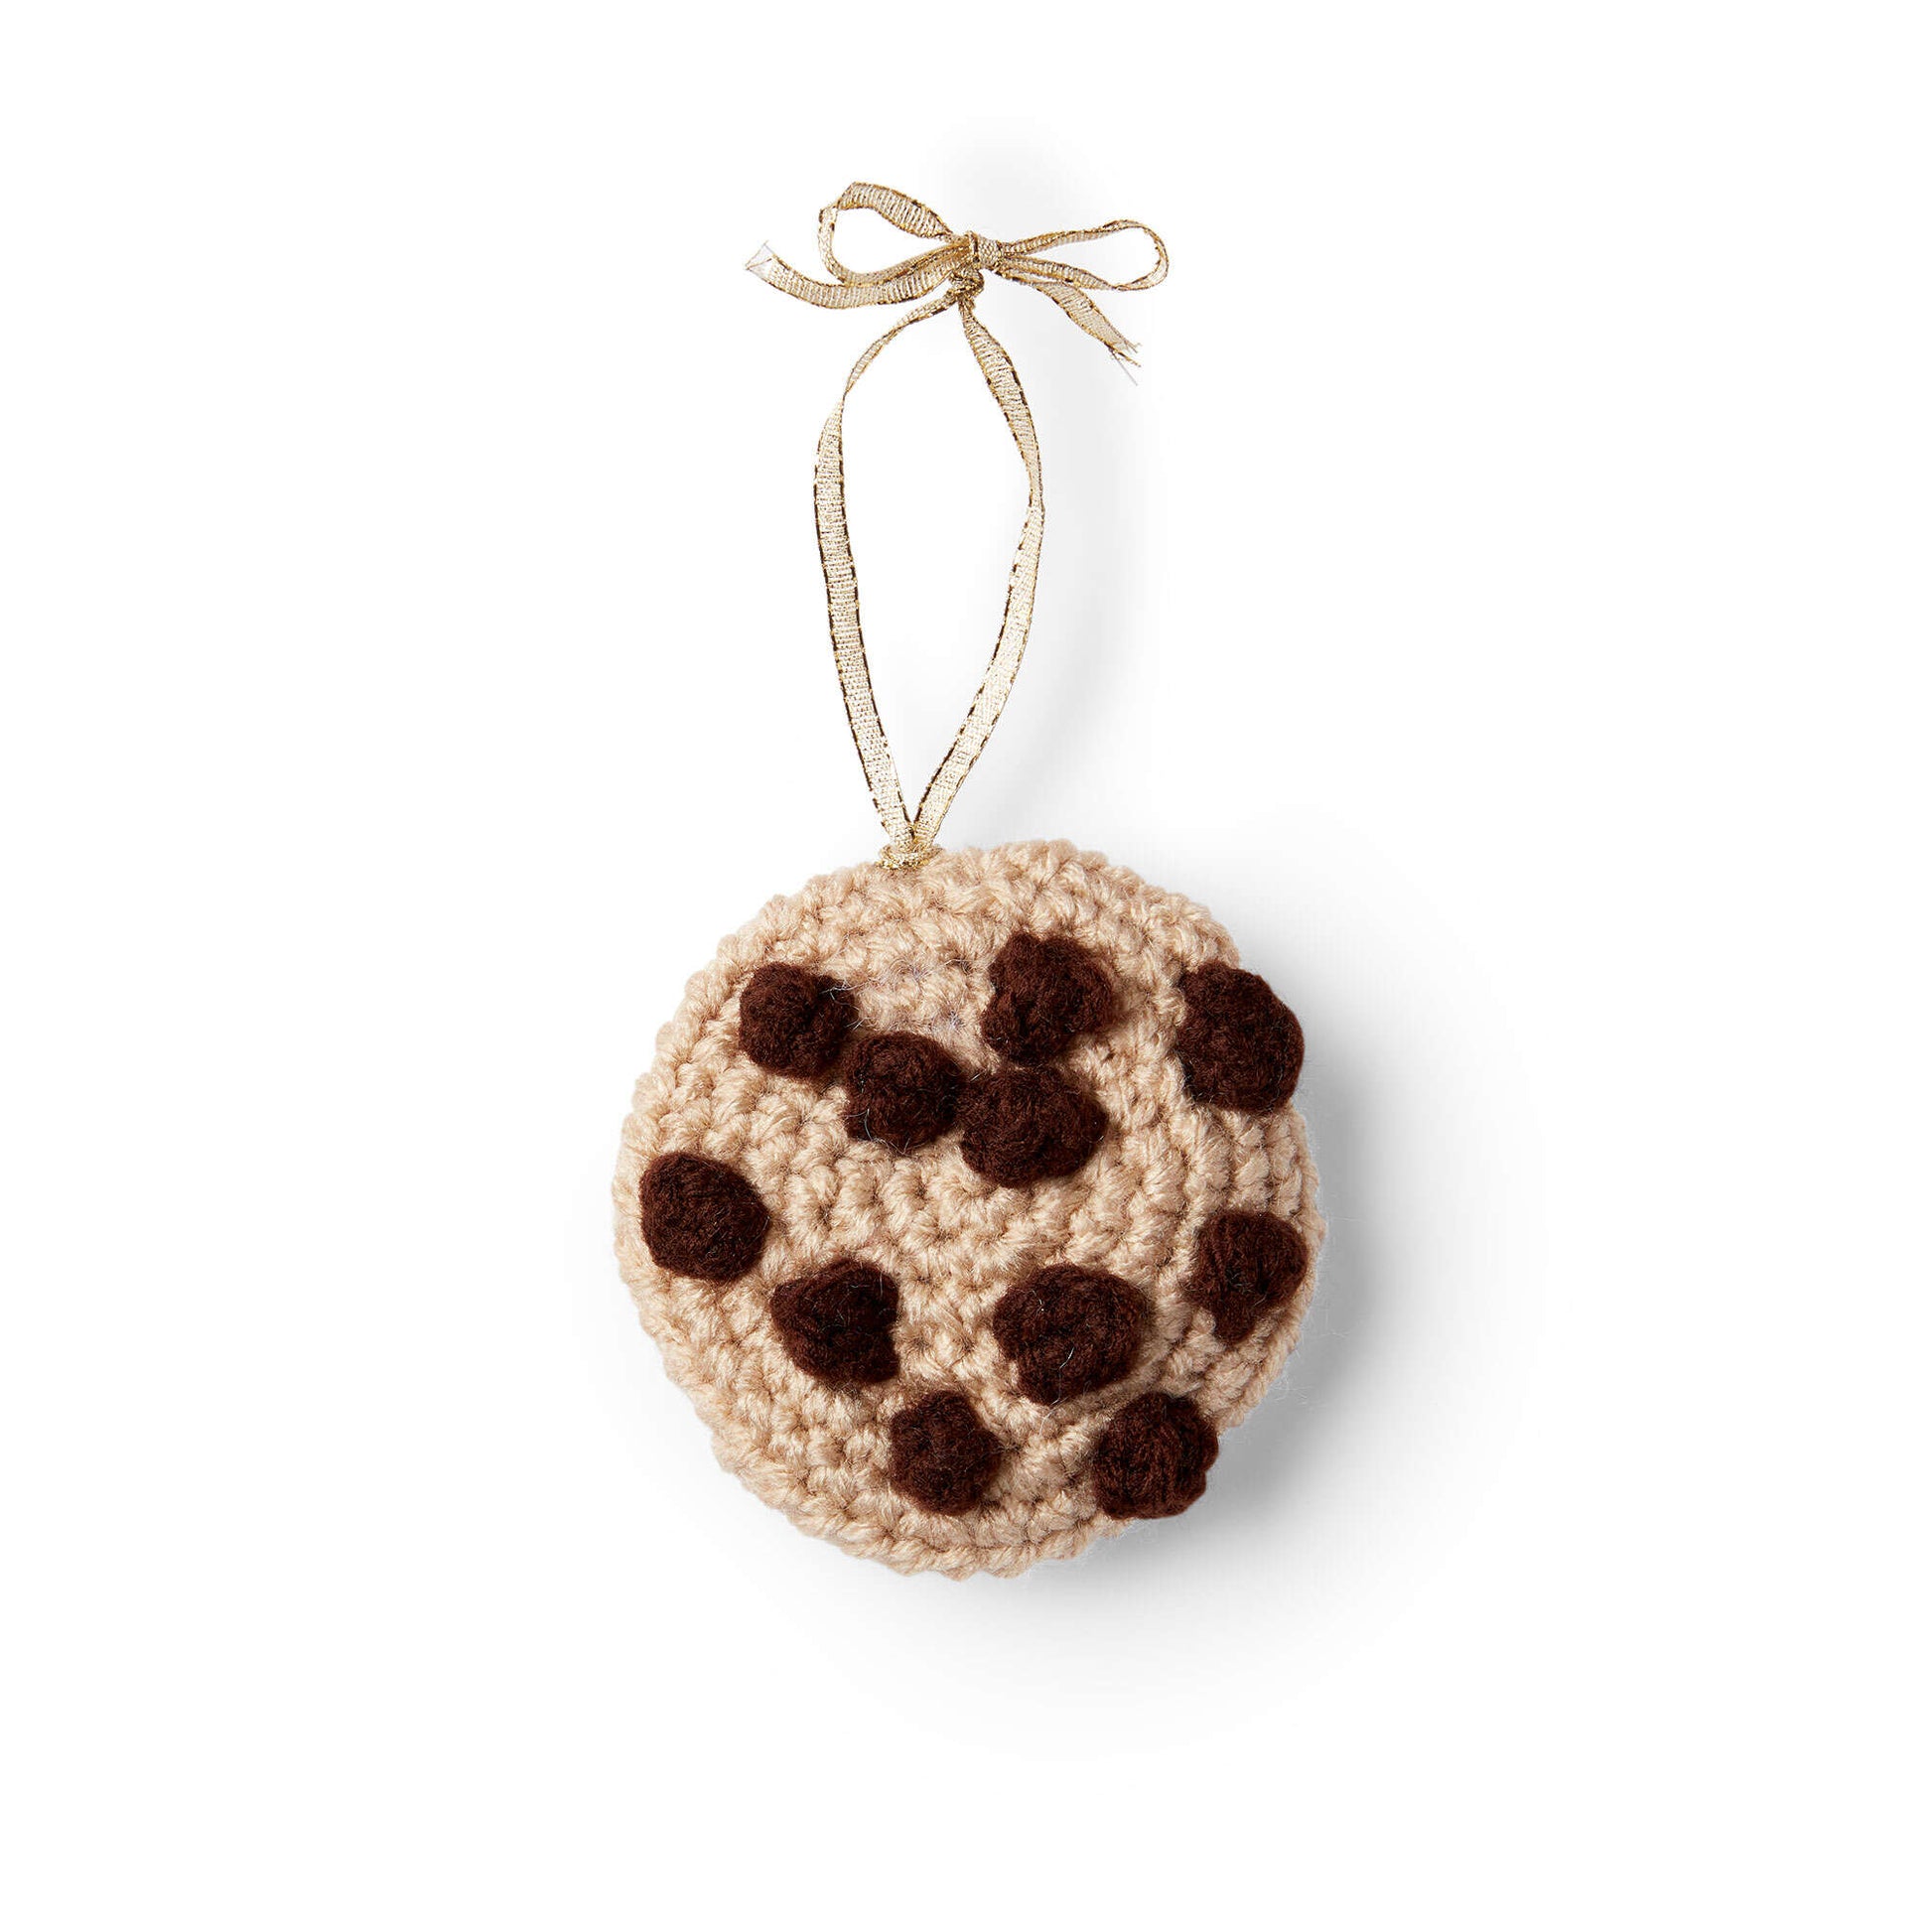 Free Red Heart Chocolate Chunk Cookie Ornament Crochet Pattern